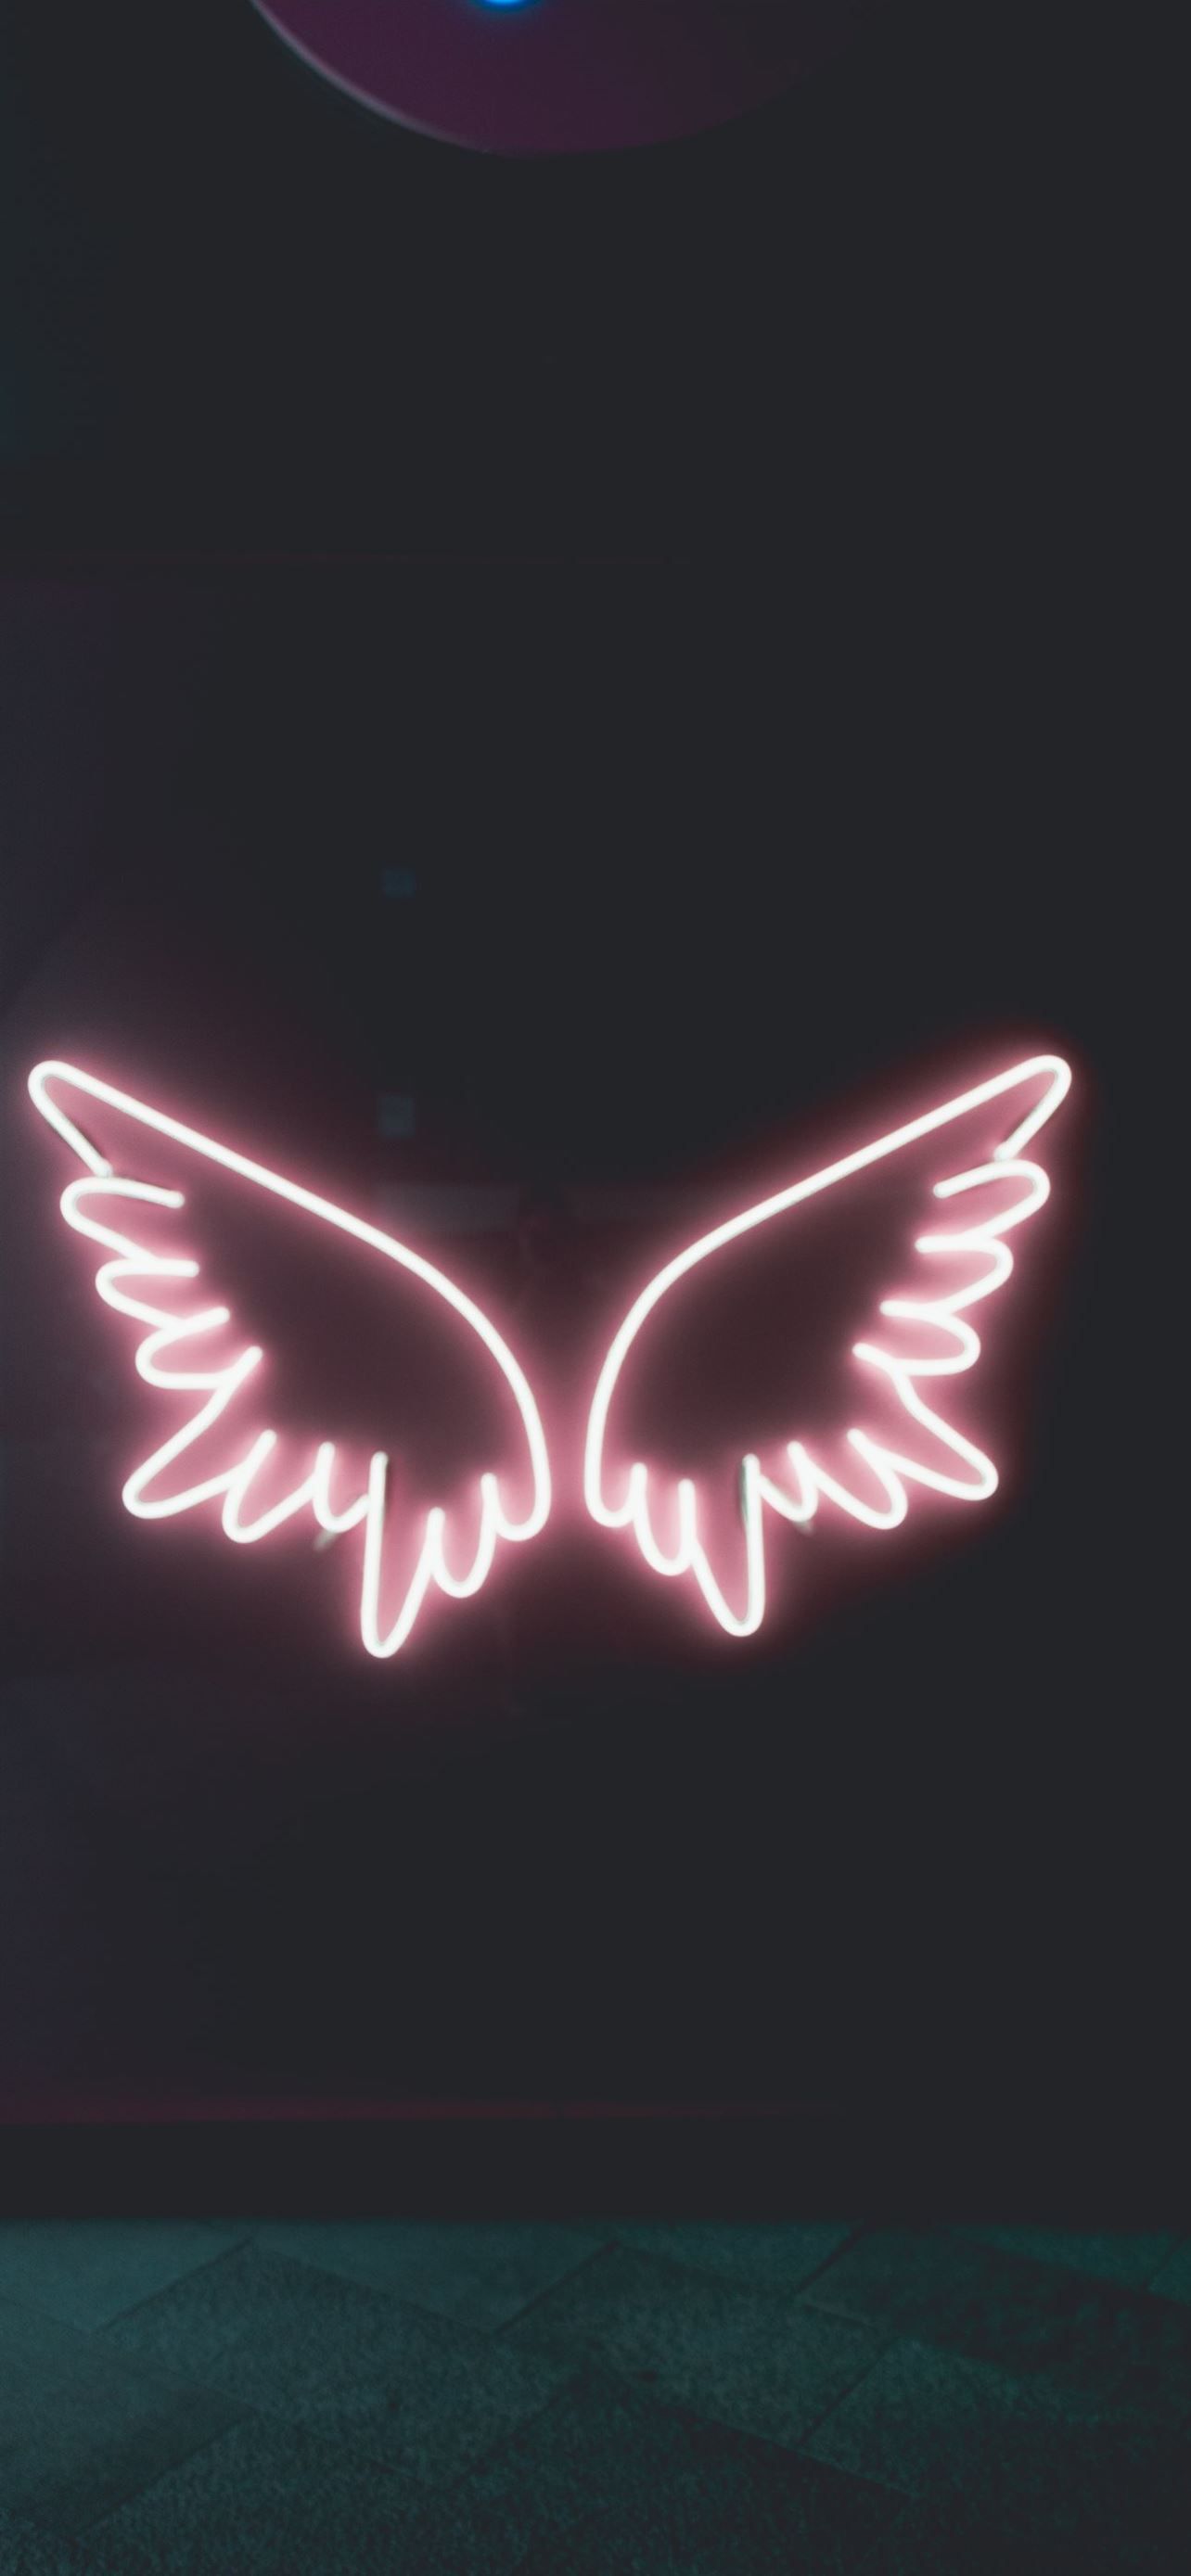 A neon sign of wings in pink and purple light. - Wings